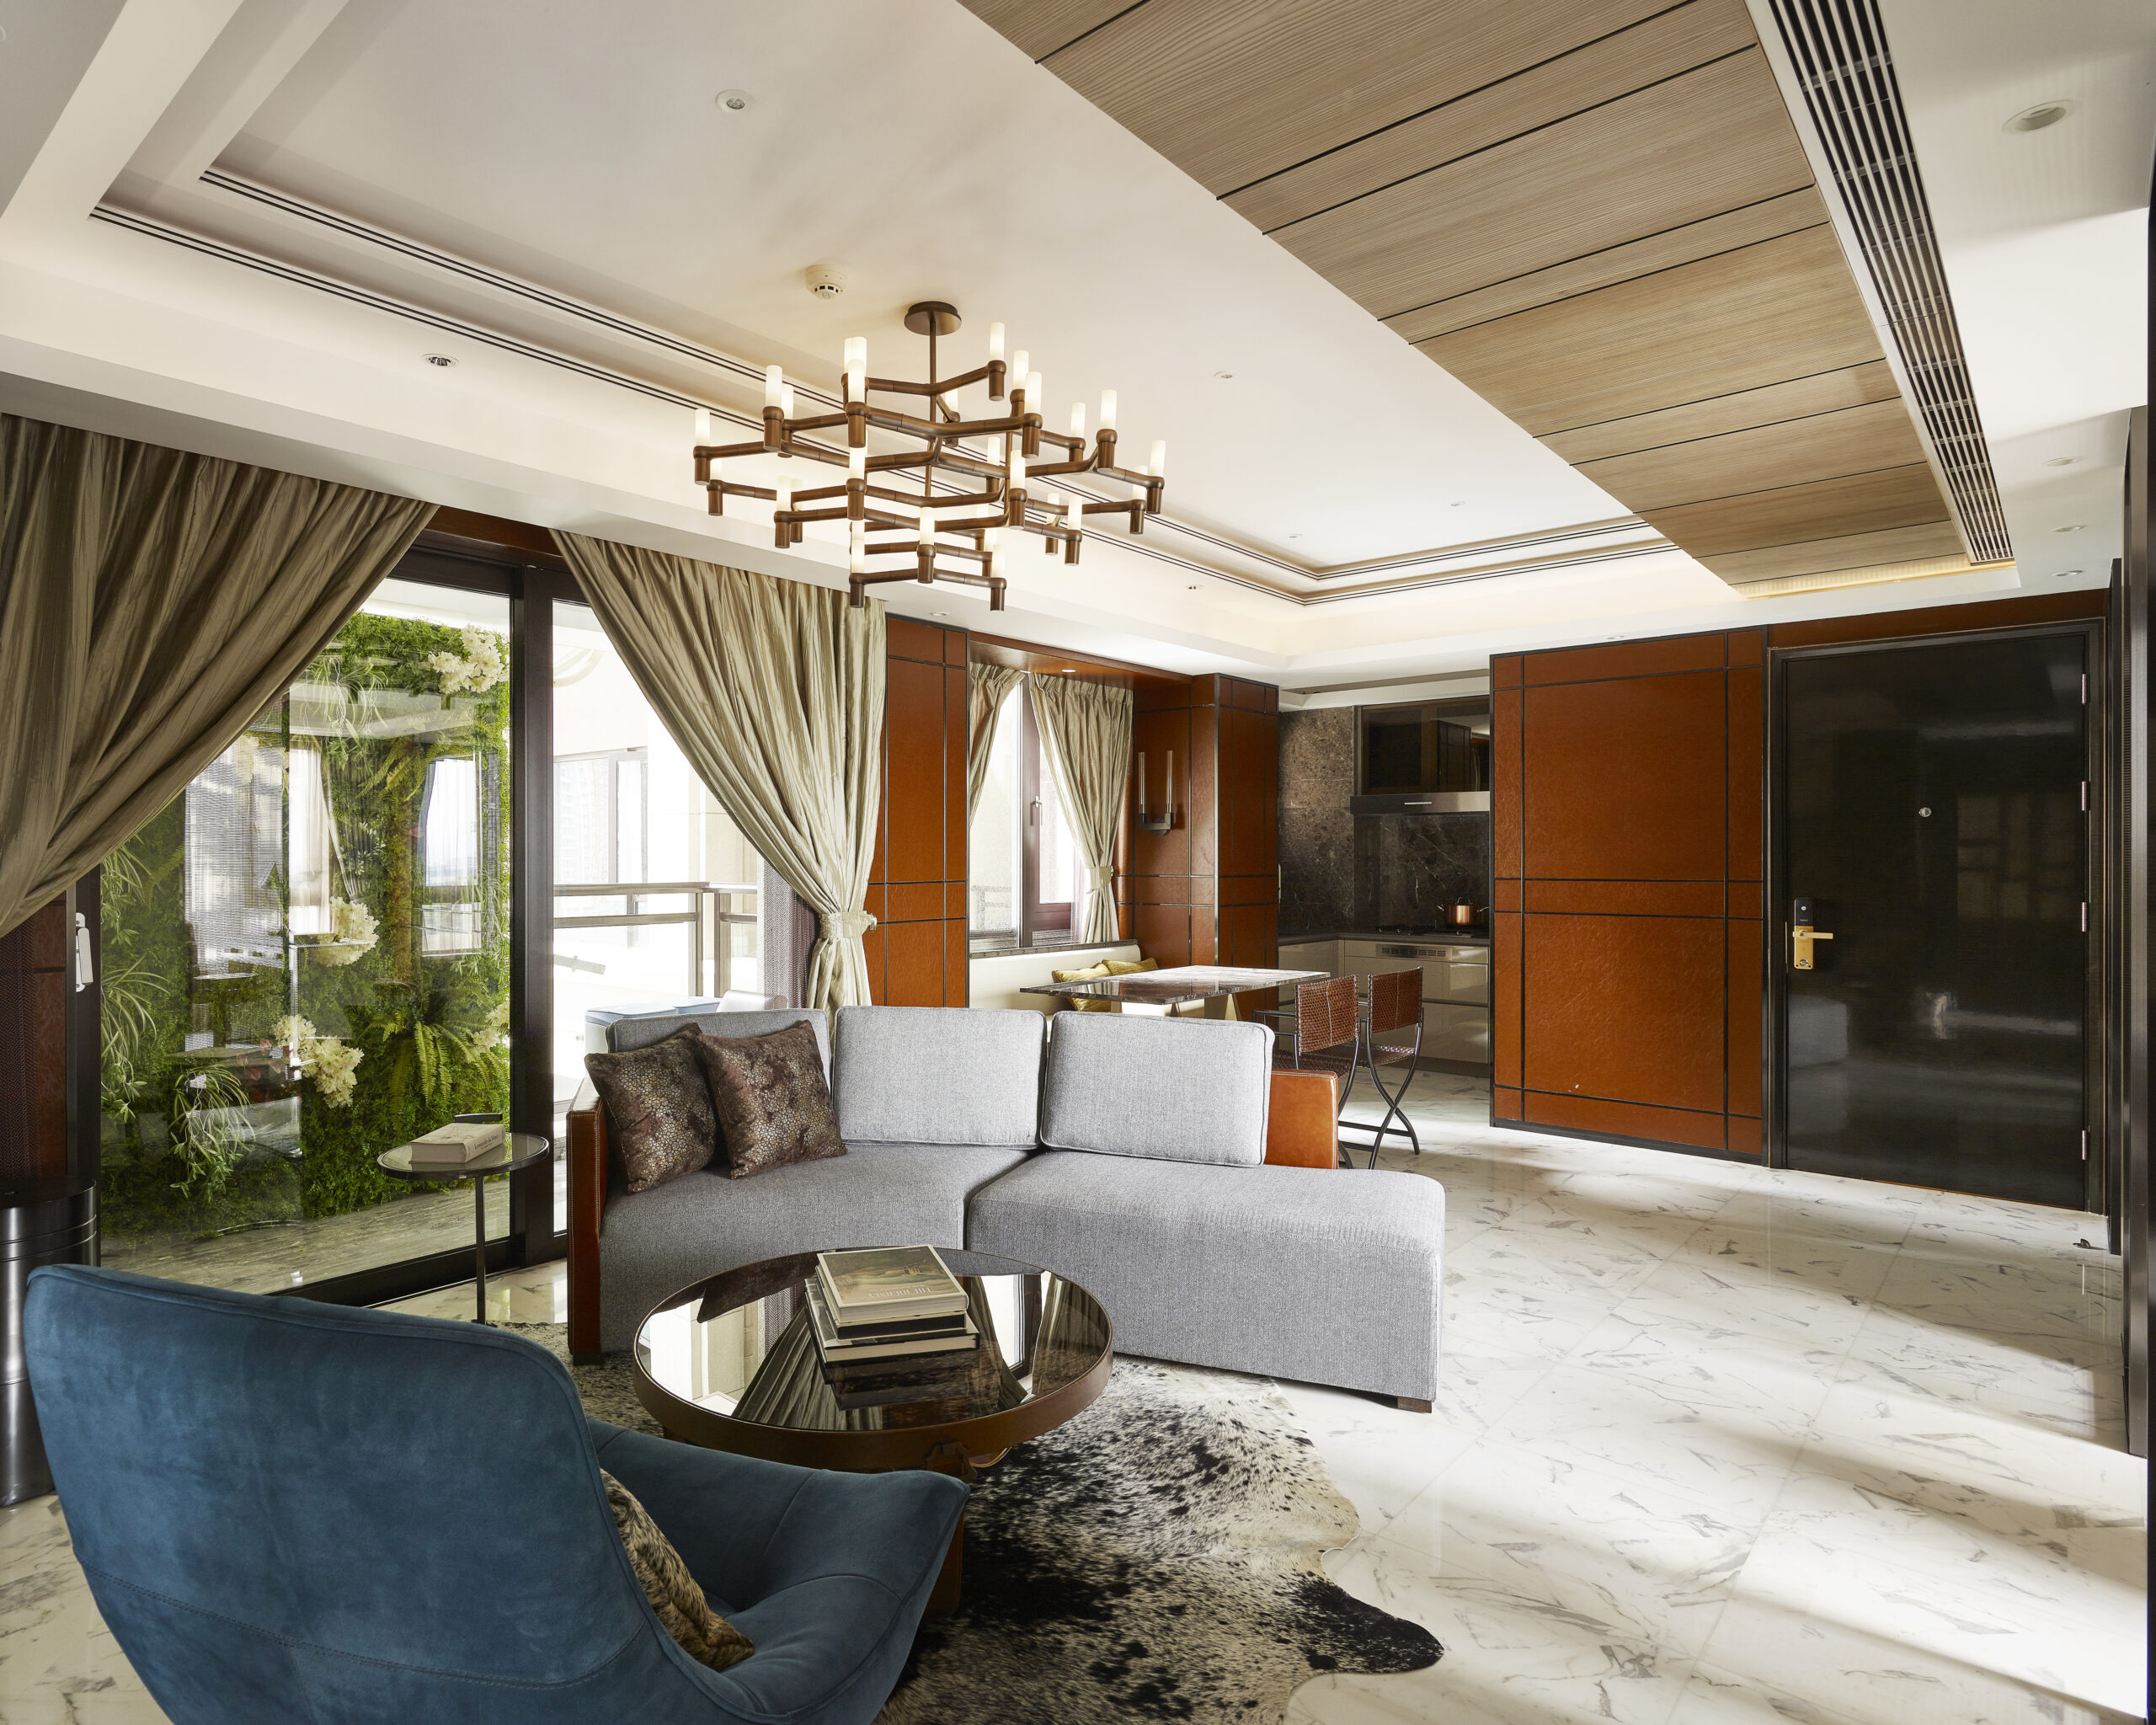 Luxury living space designed by CheeGeen interior.